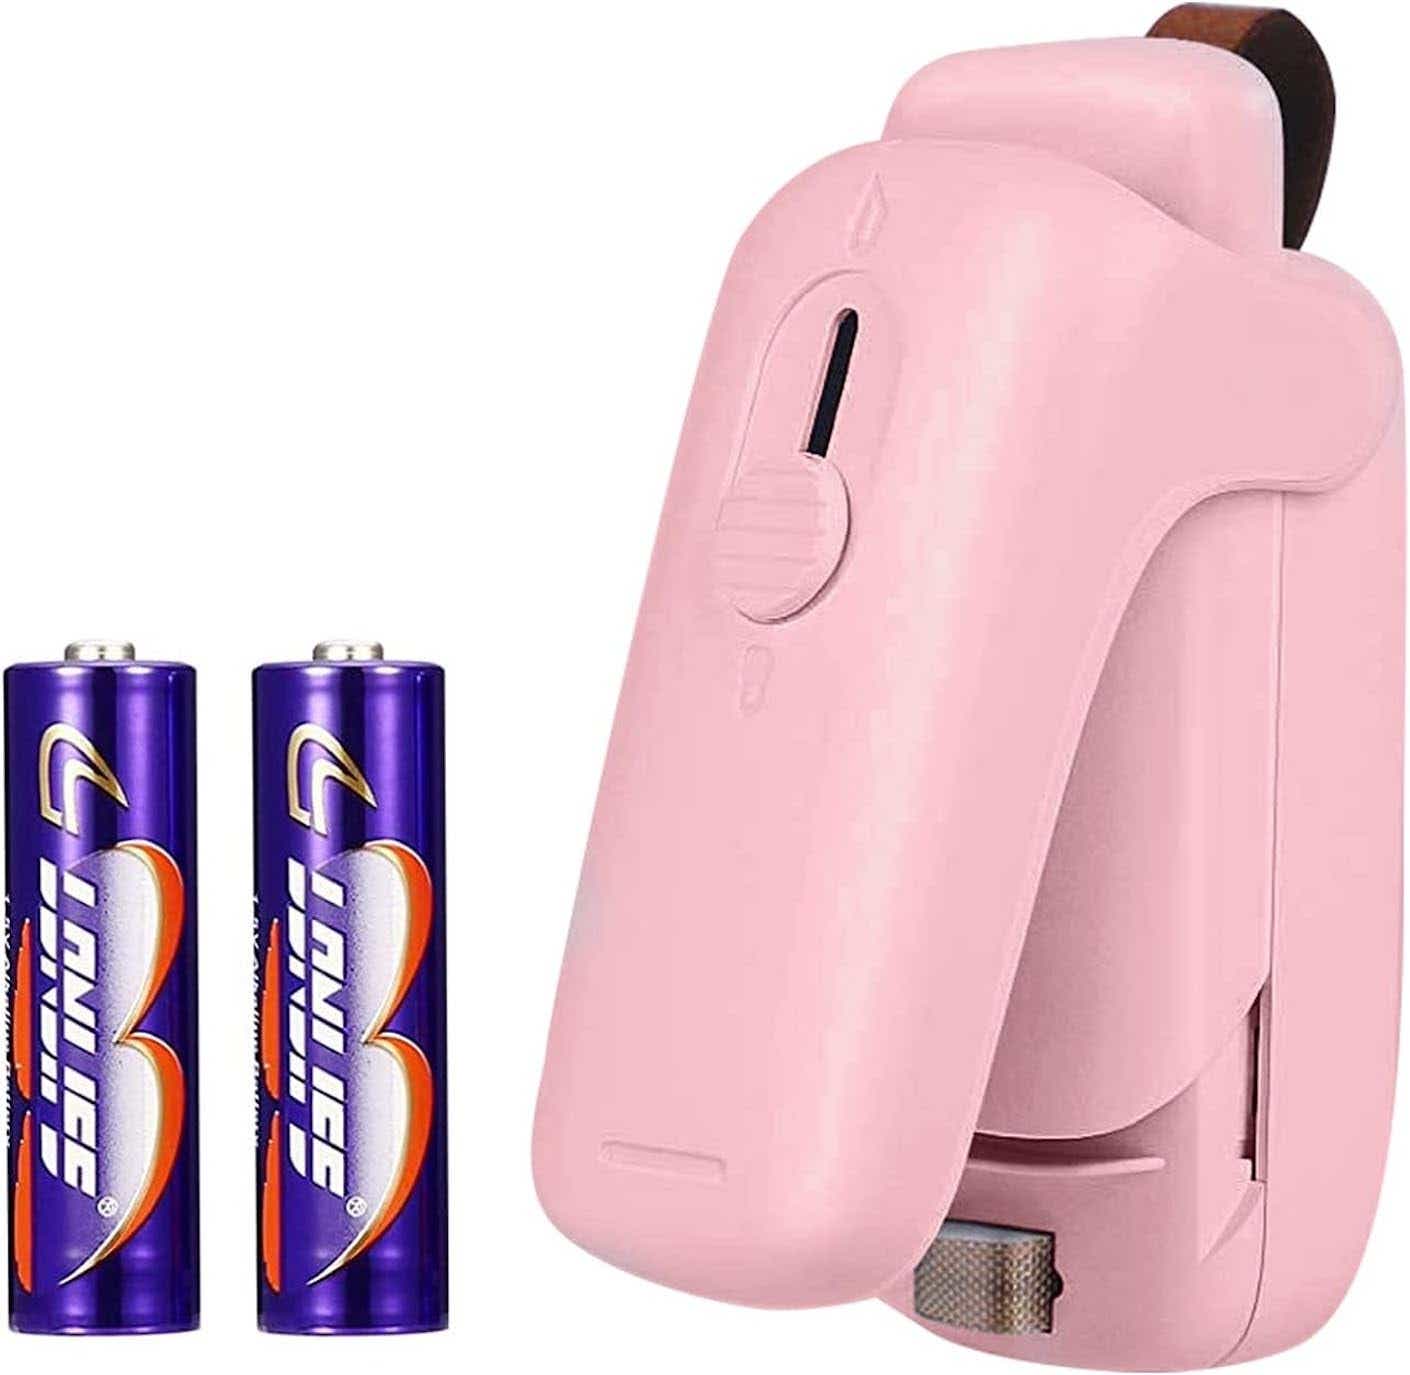 A pink mini bag sealer pictured alongside two AA batteries